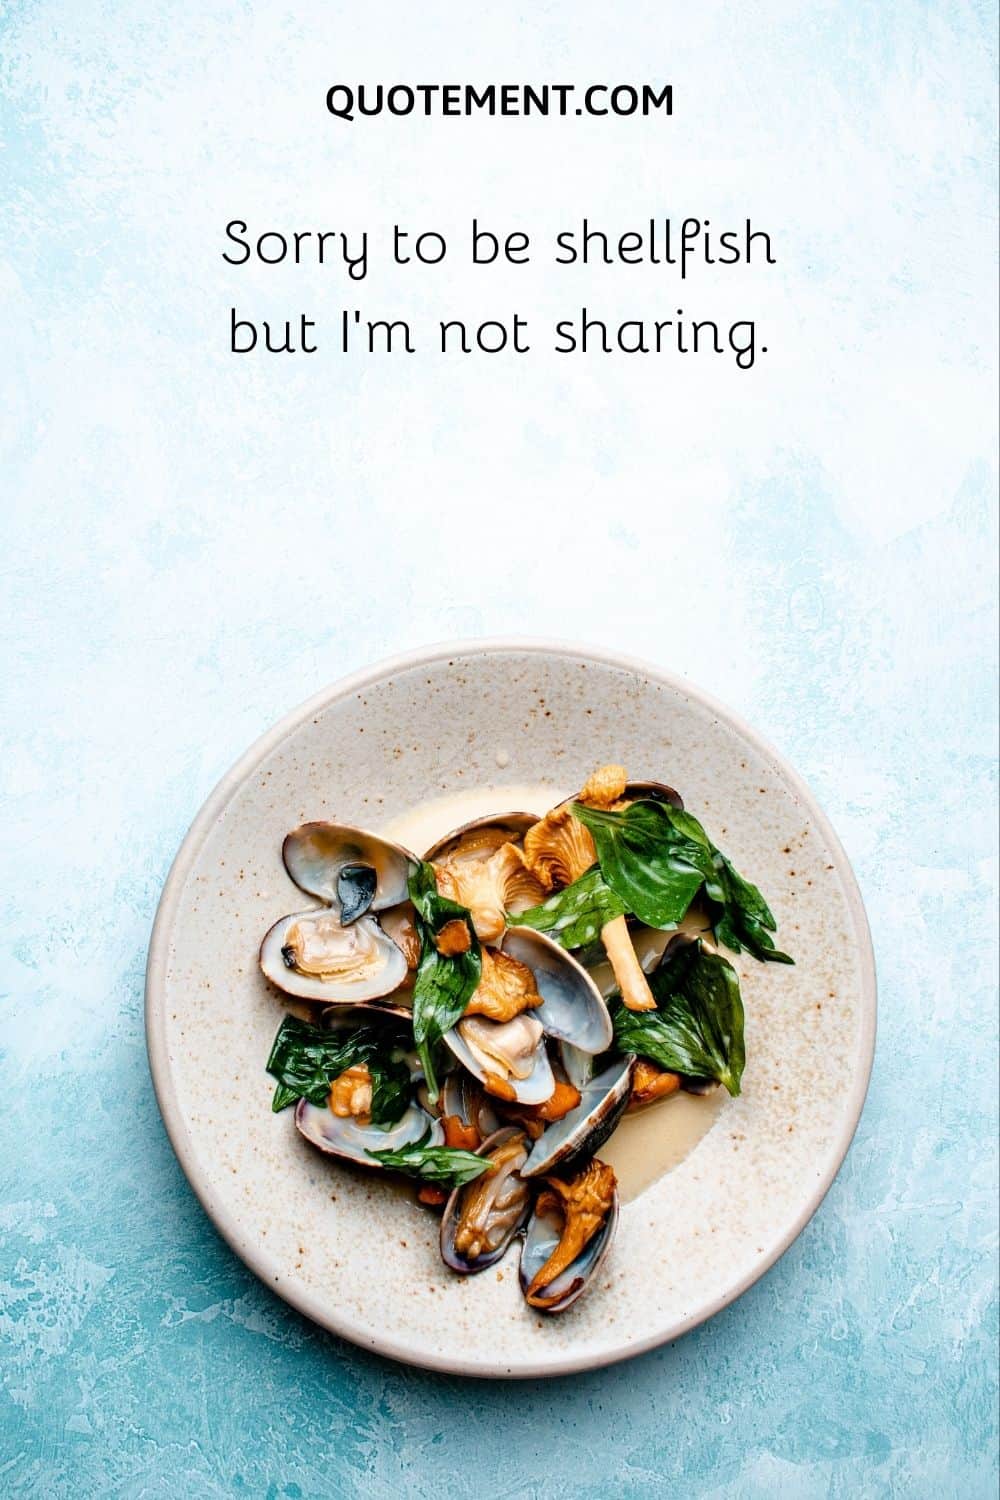 Sorry to be shellfish but I’m not sharing.